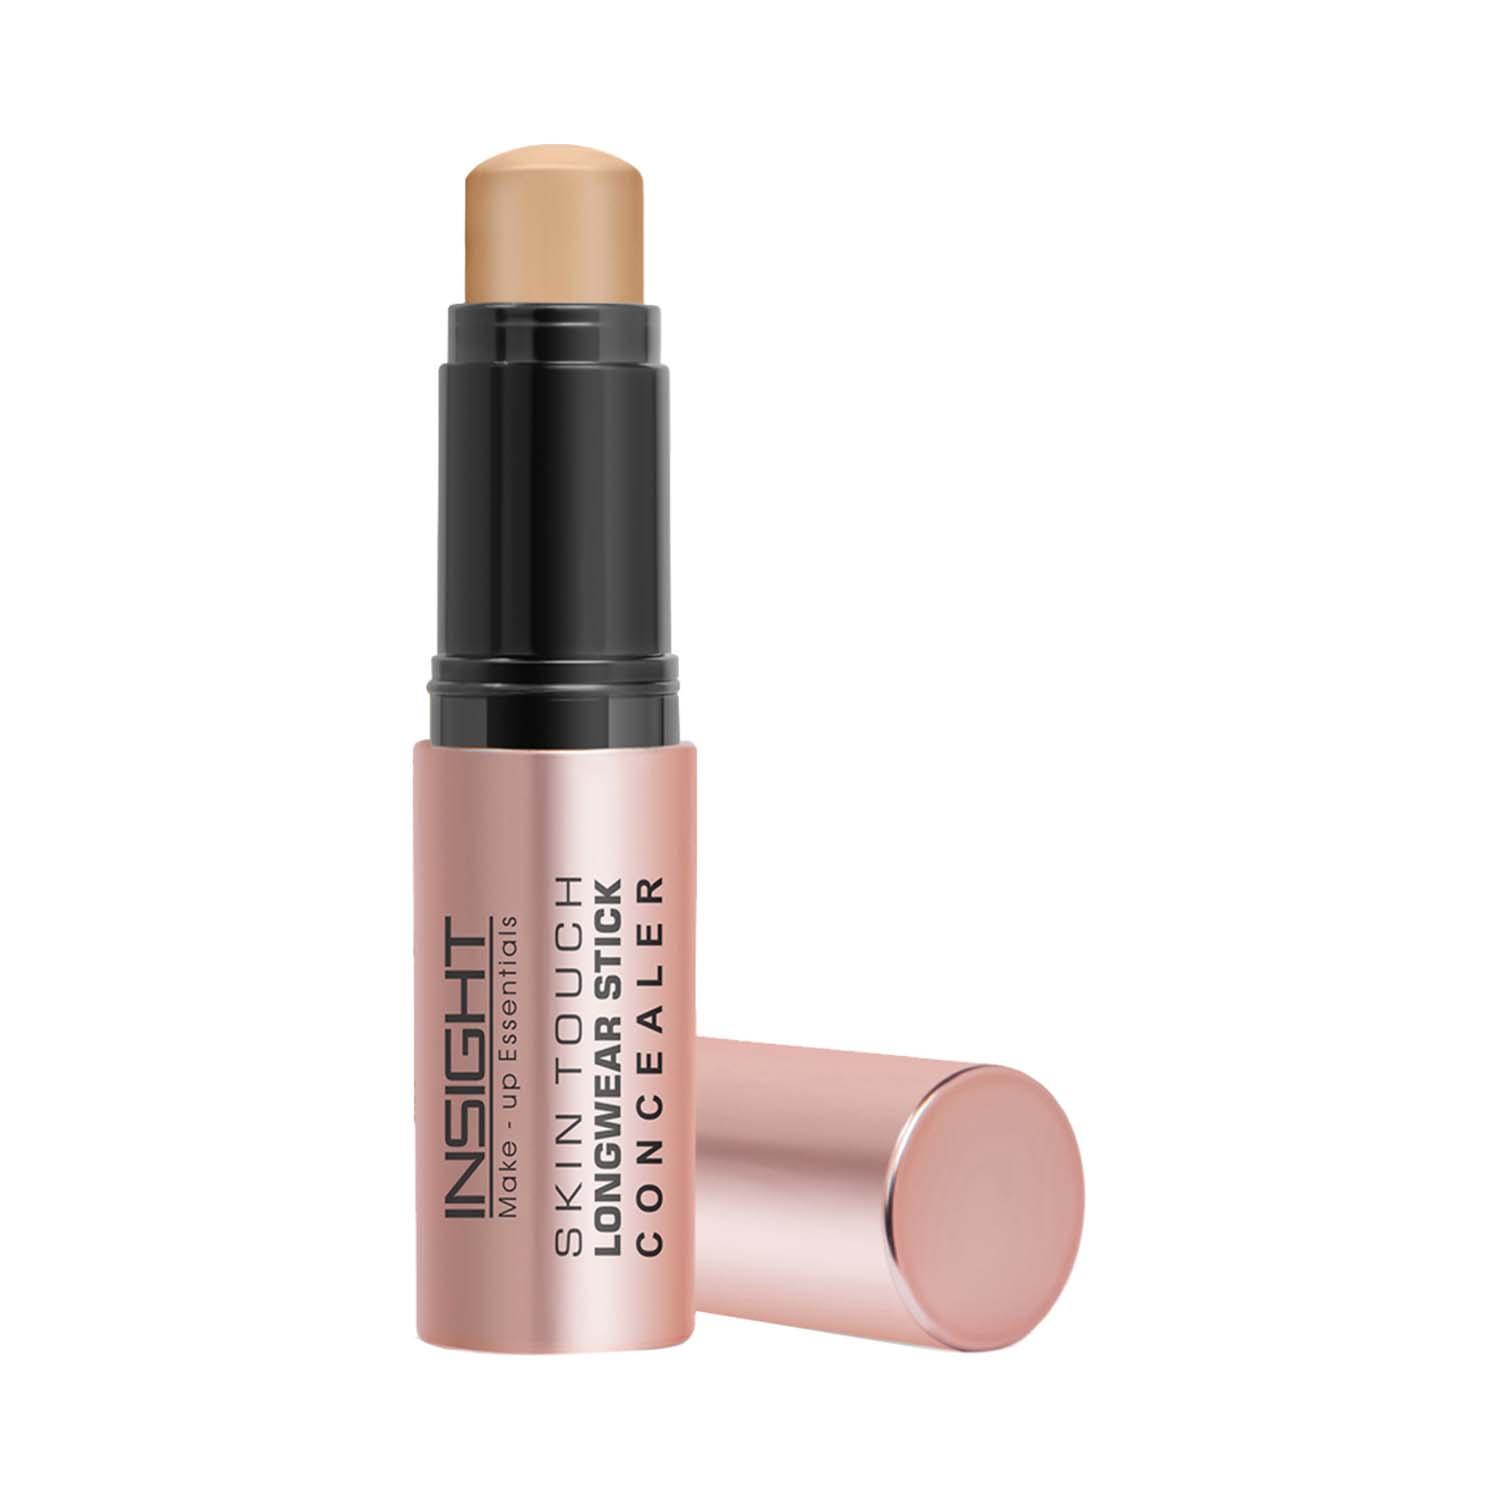 Insight Cosmetics | Insight Cosmetics Skin Touch Longwear Concealer - MN25 (5 g)